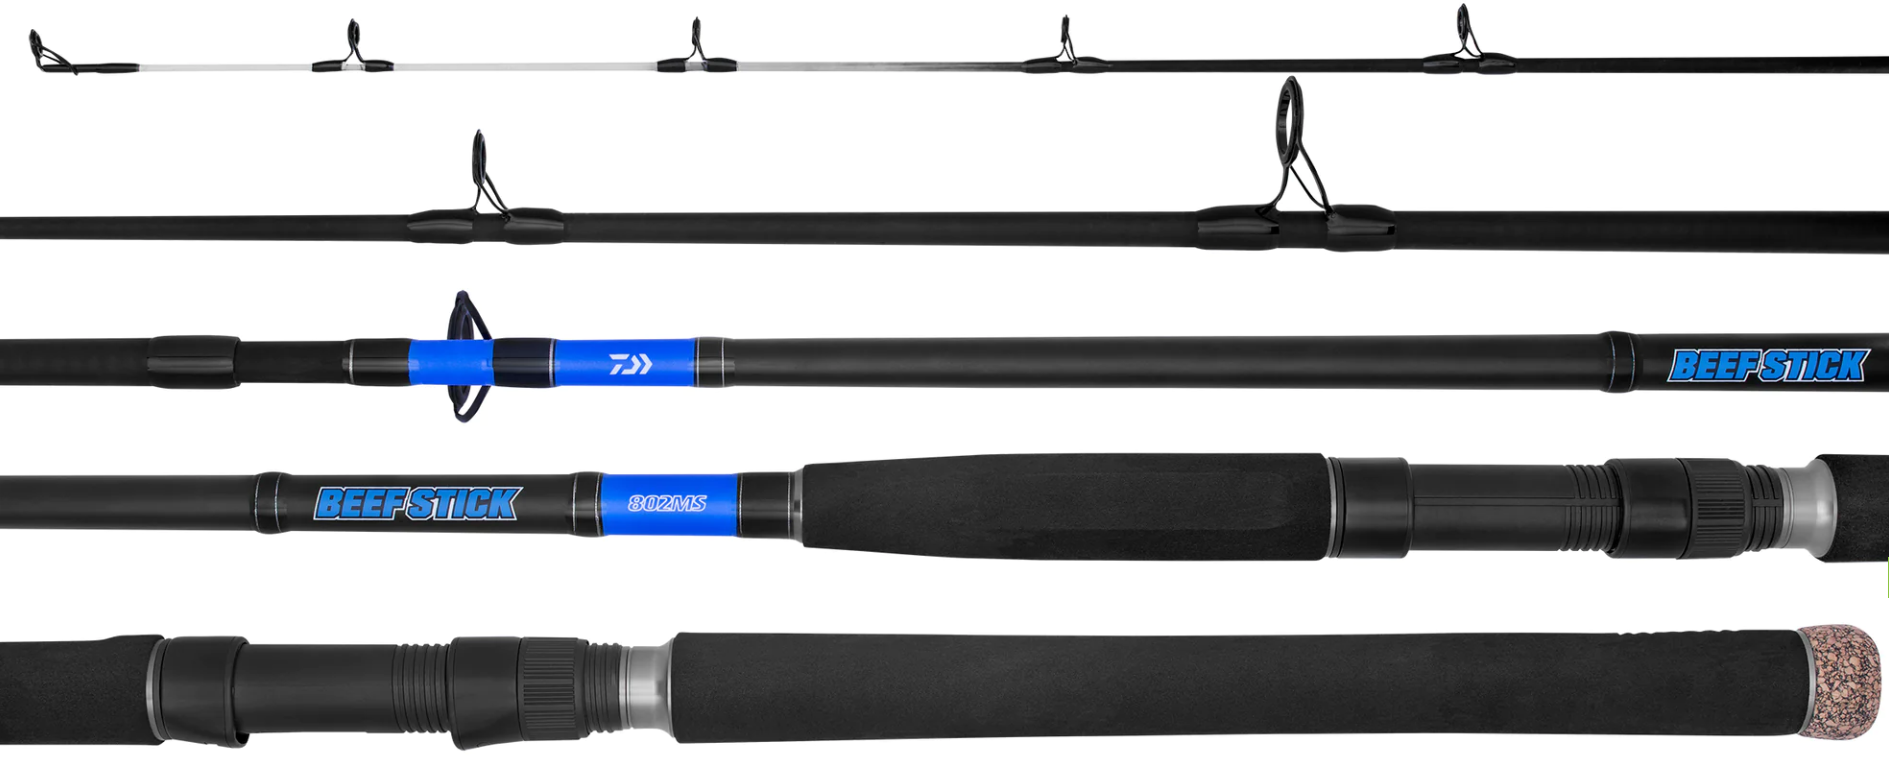 Daiwa Beefstick Spin Rod -  - Mansfield Hunting & Fishing - Products to prepare for Corona Virus